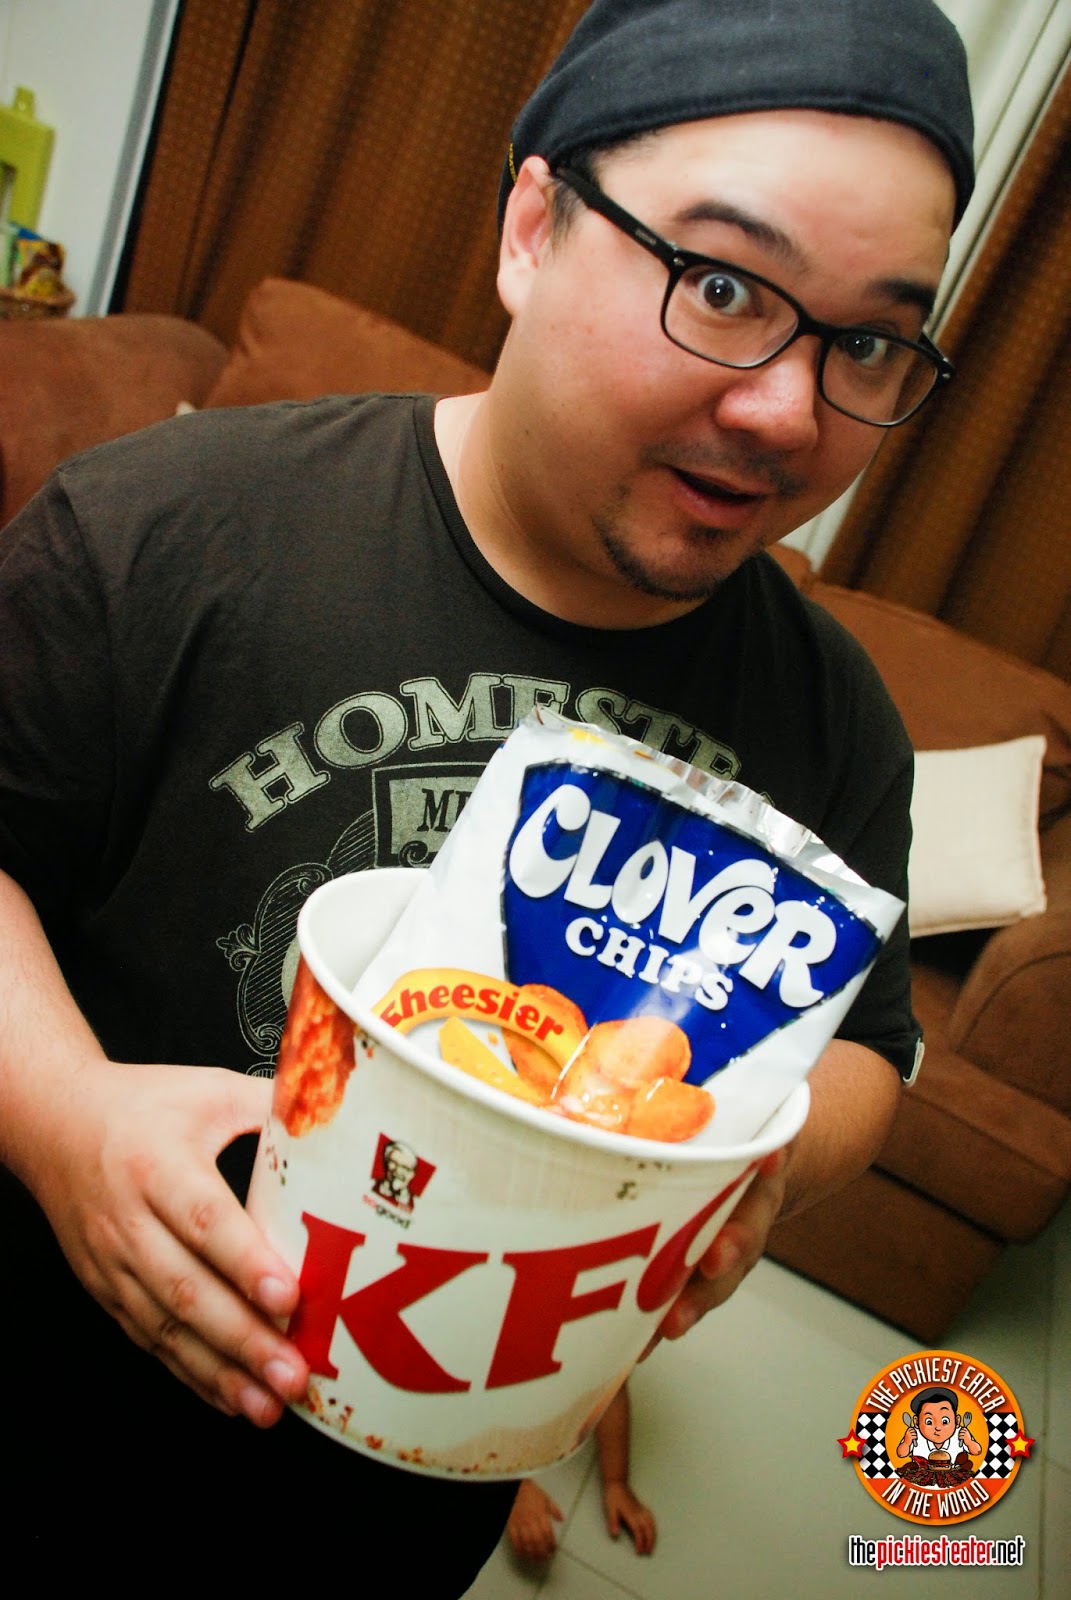 kfc and clover chips